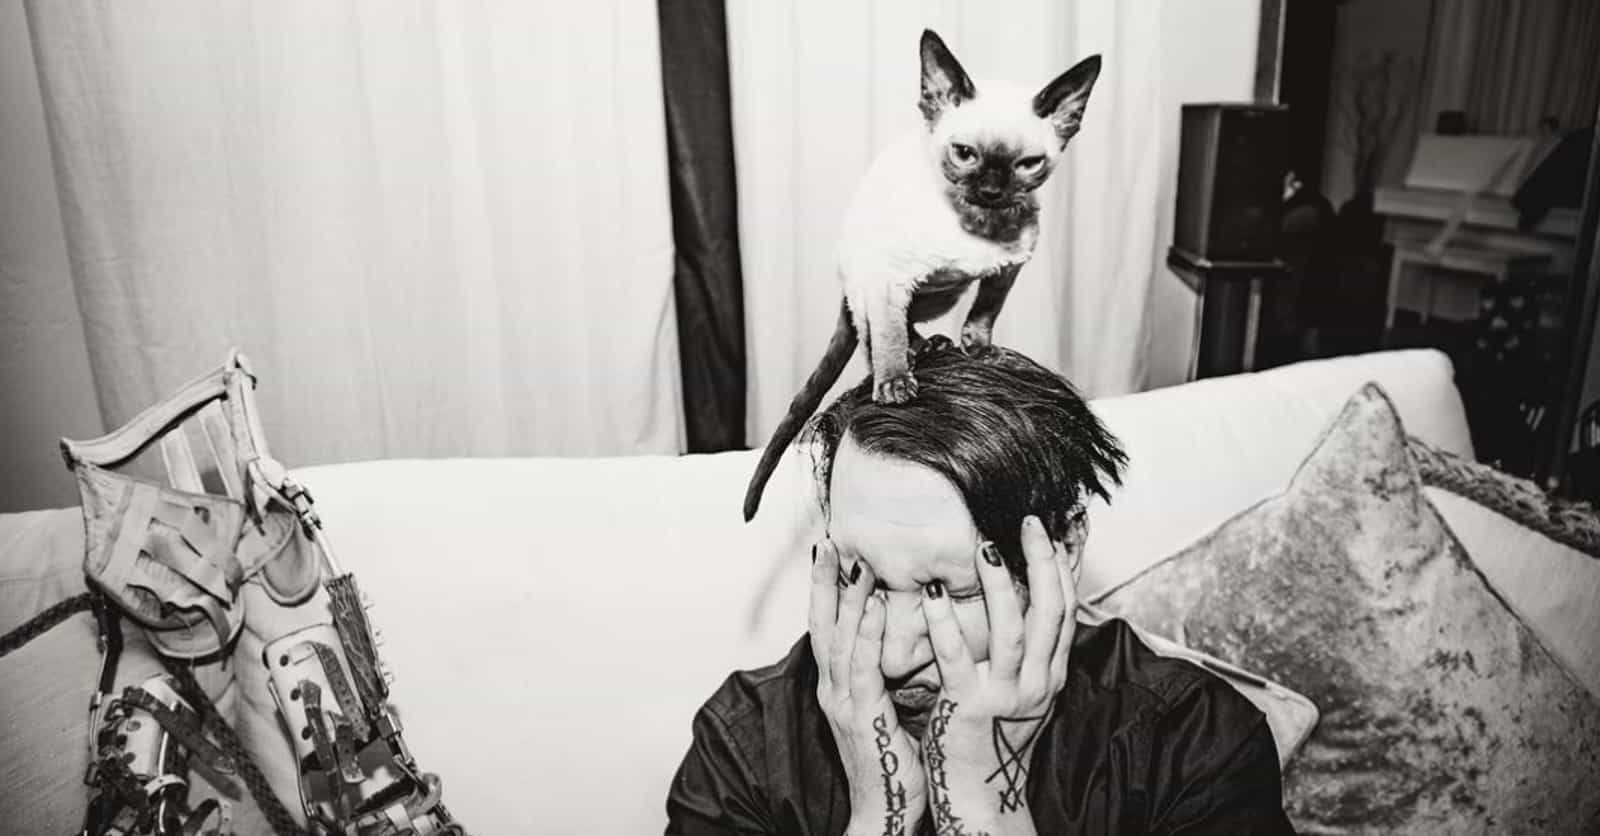 Metal Musicians Looking Adorable With Their Cute Pets